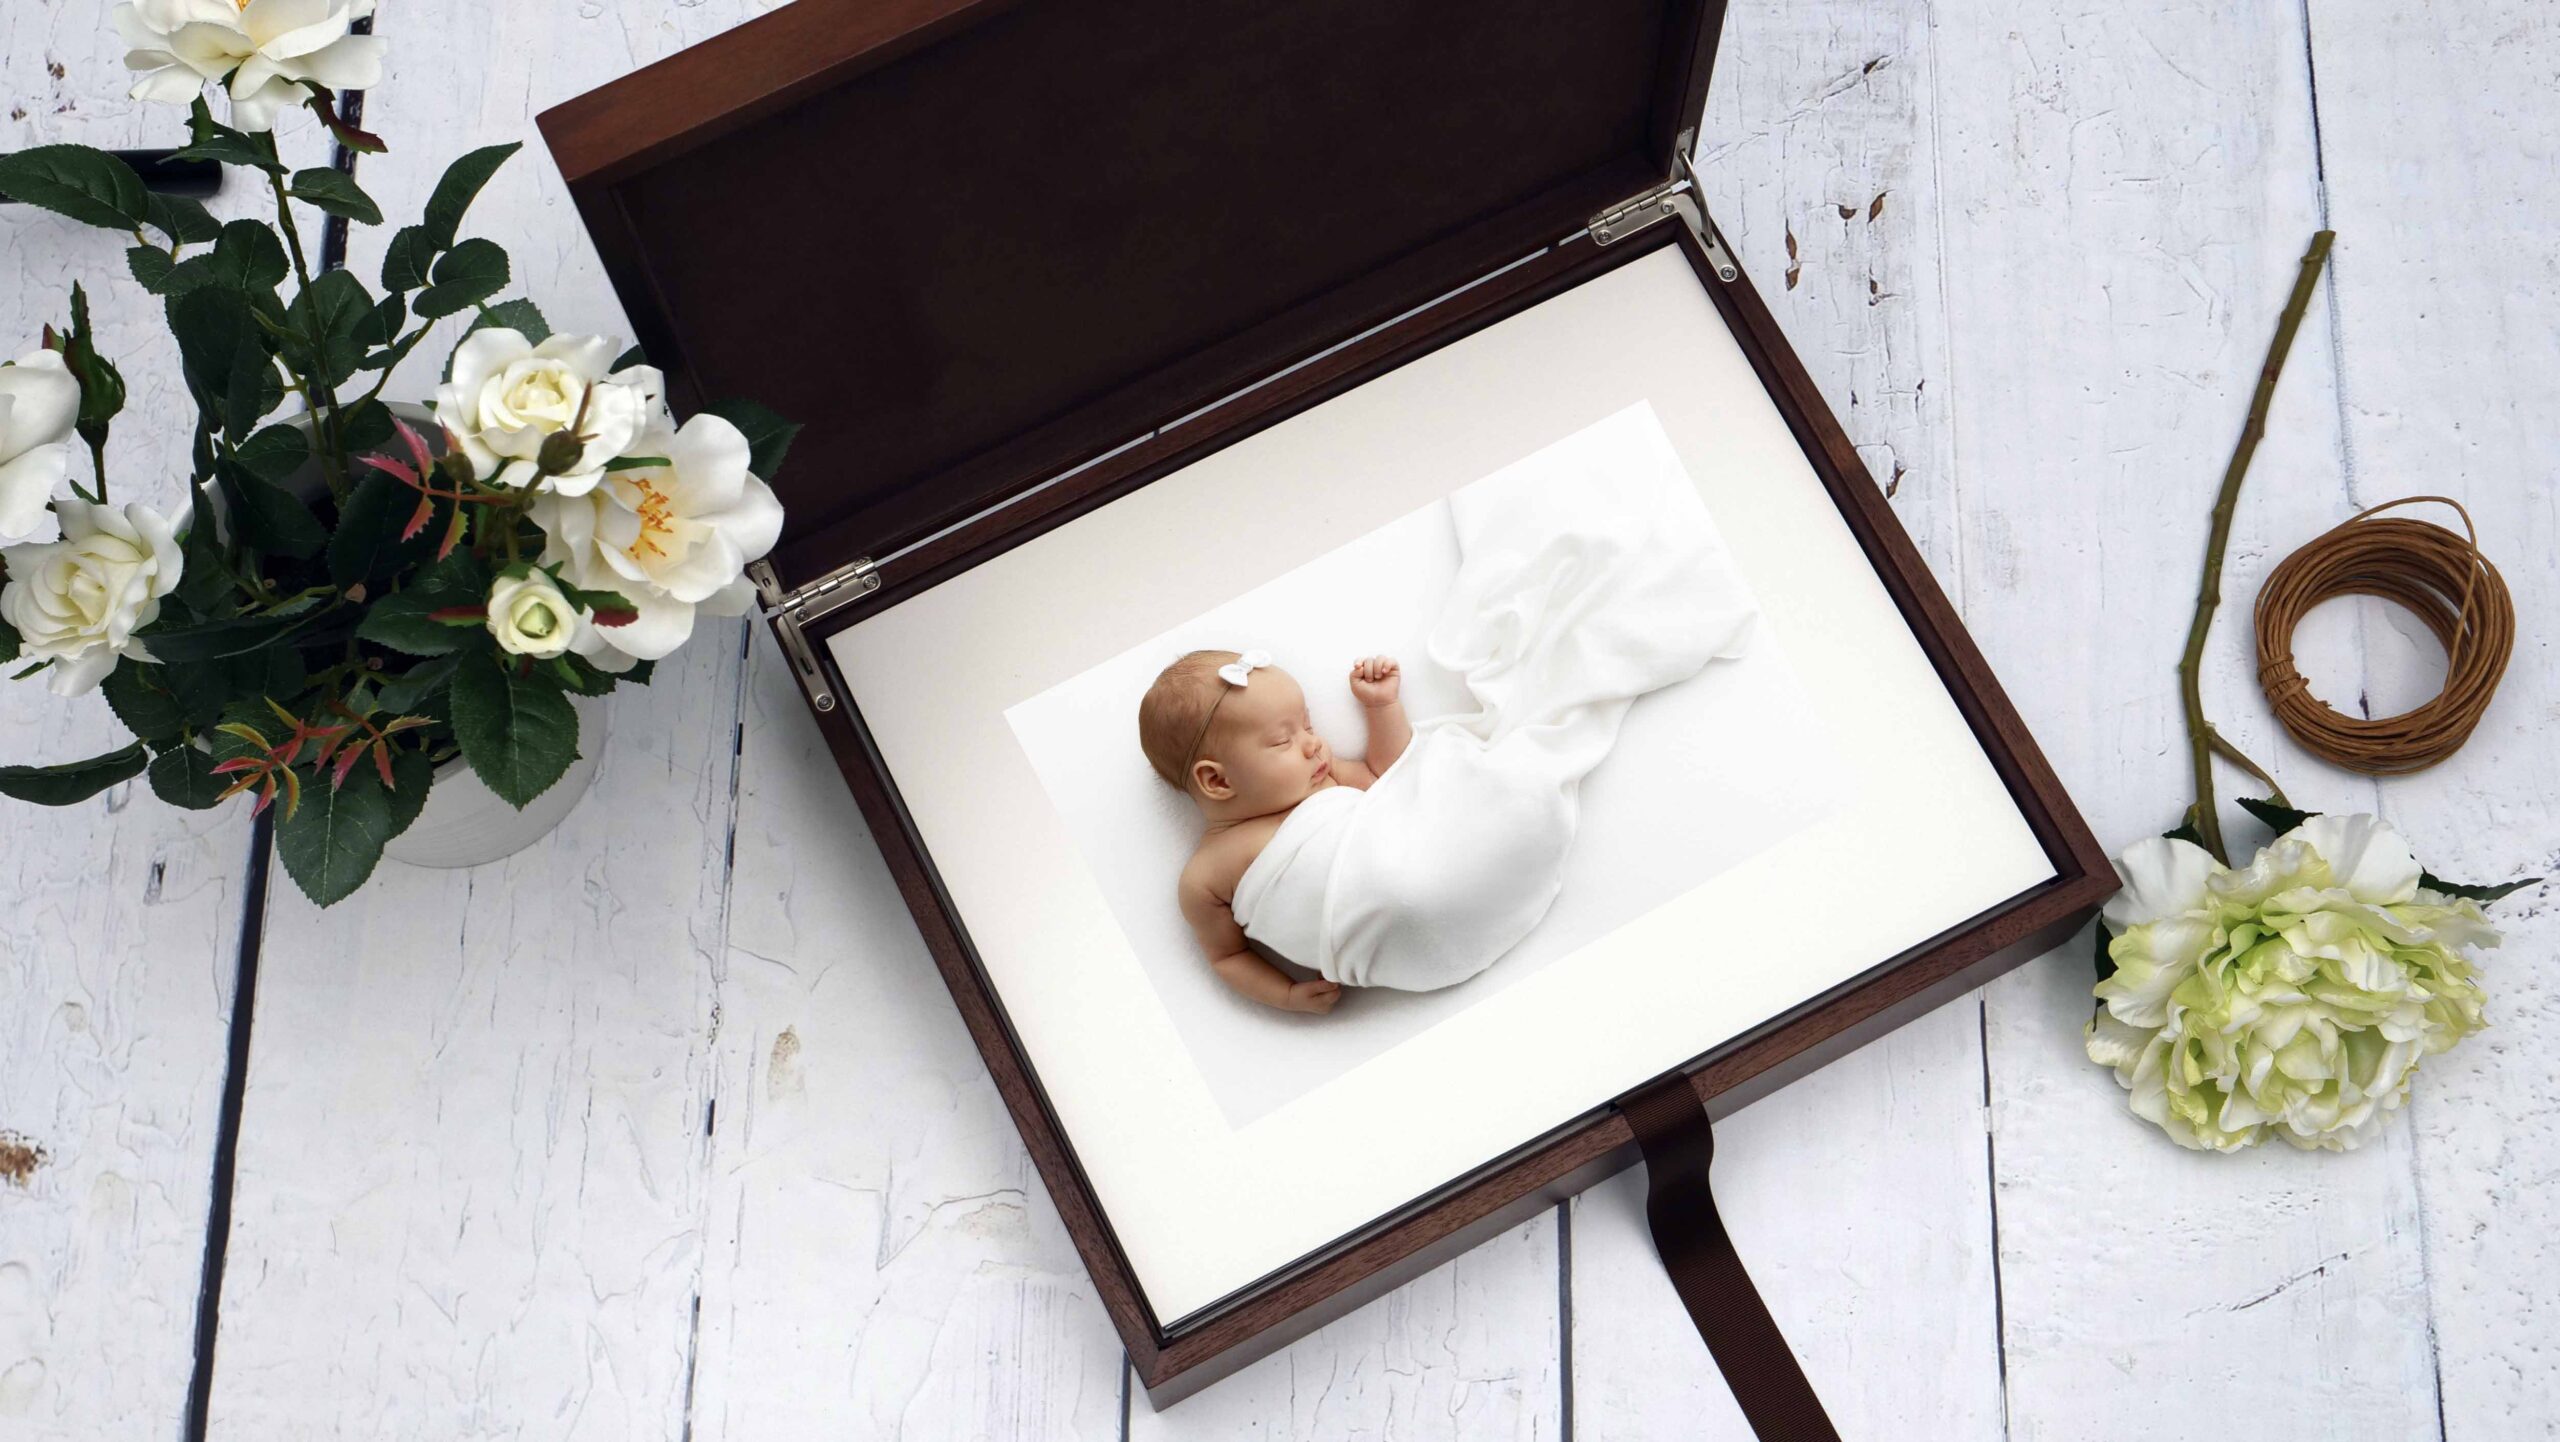 matted portrait prints in walnut box by baby photographer Dallas